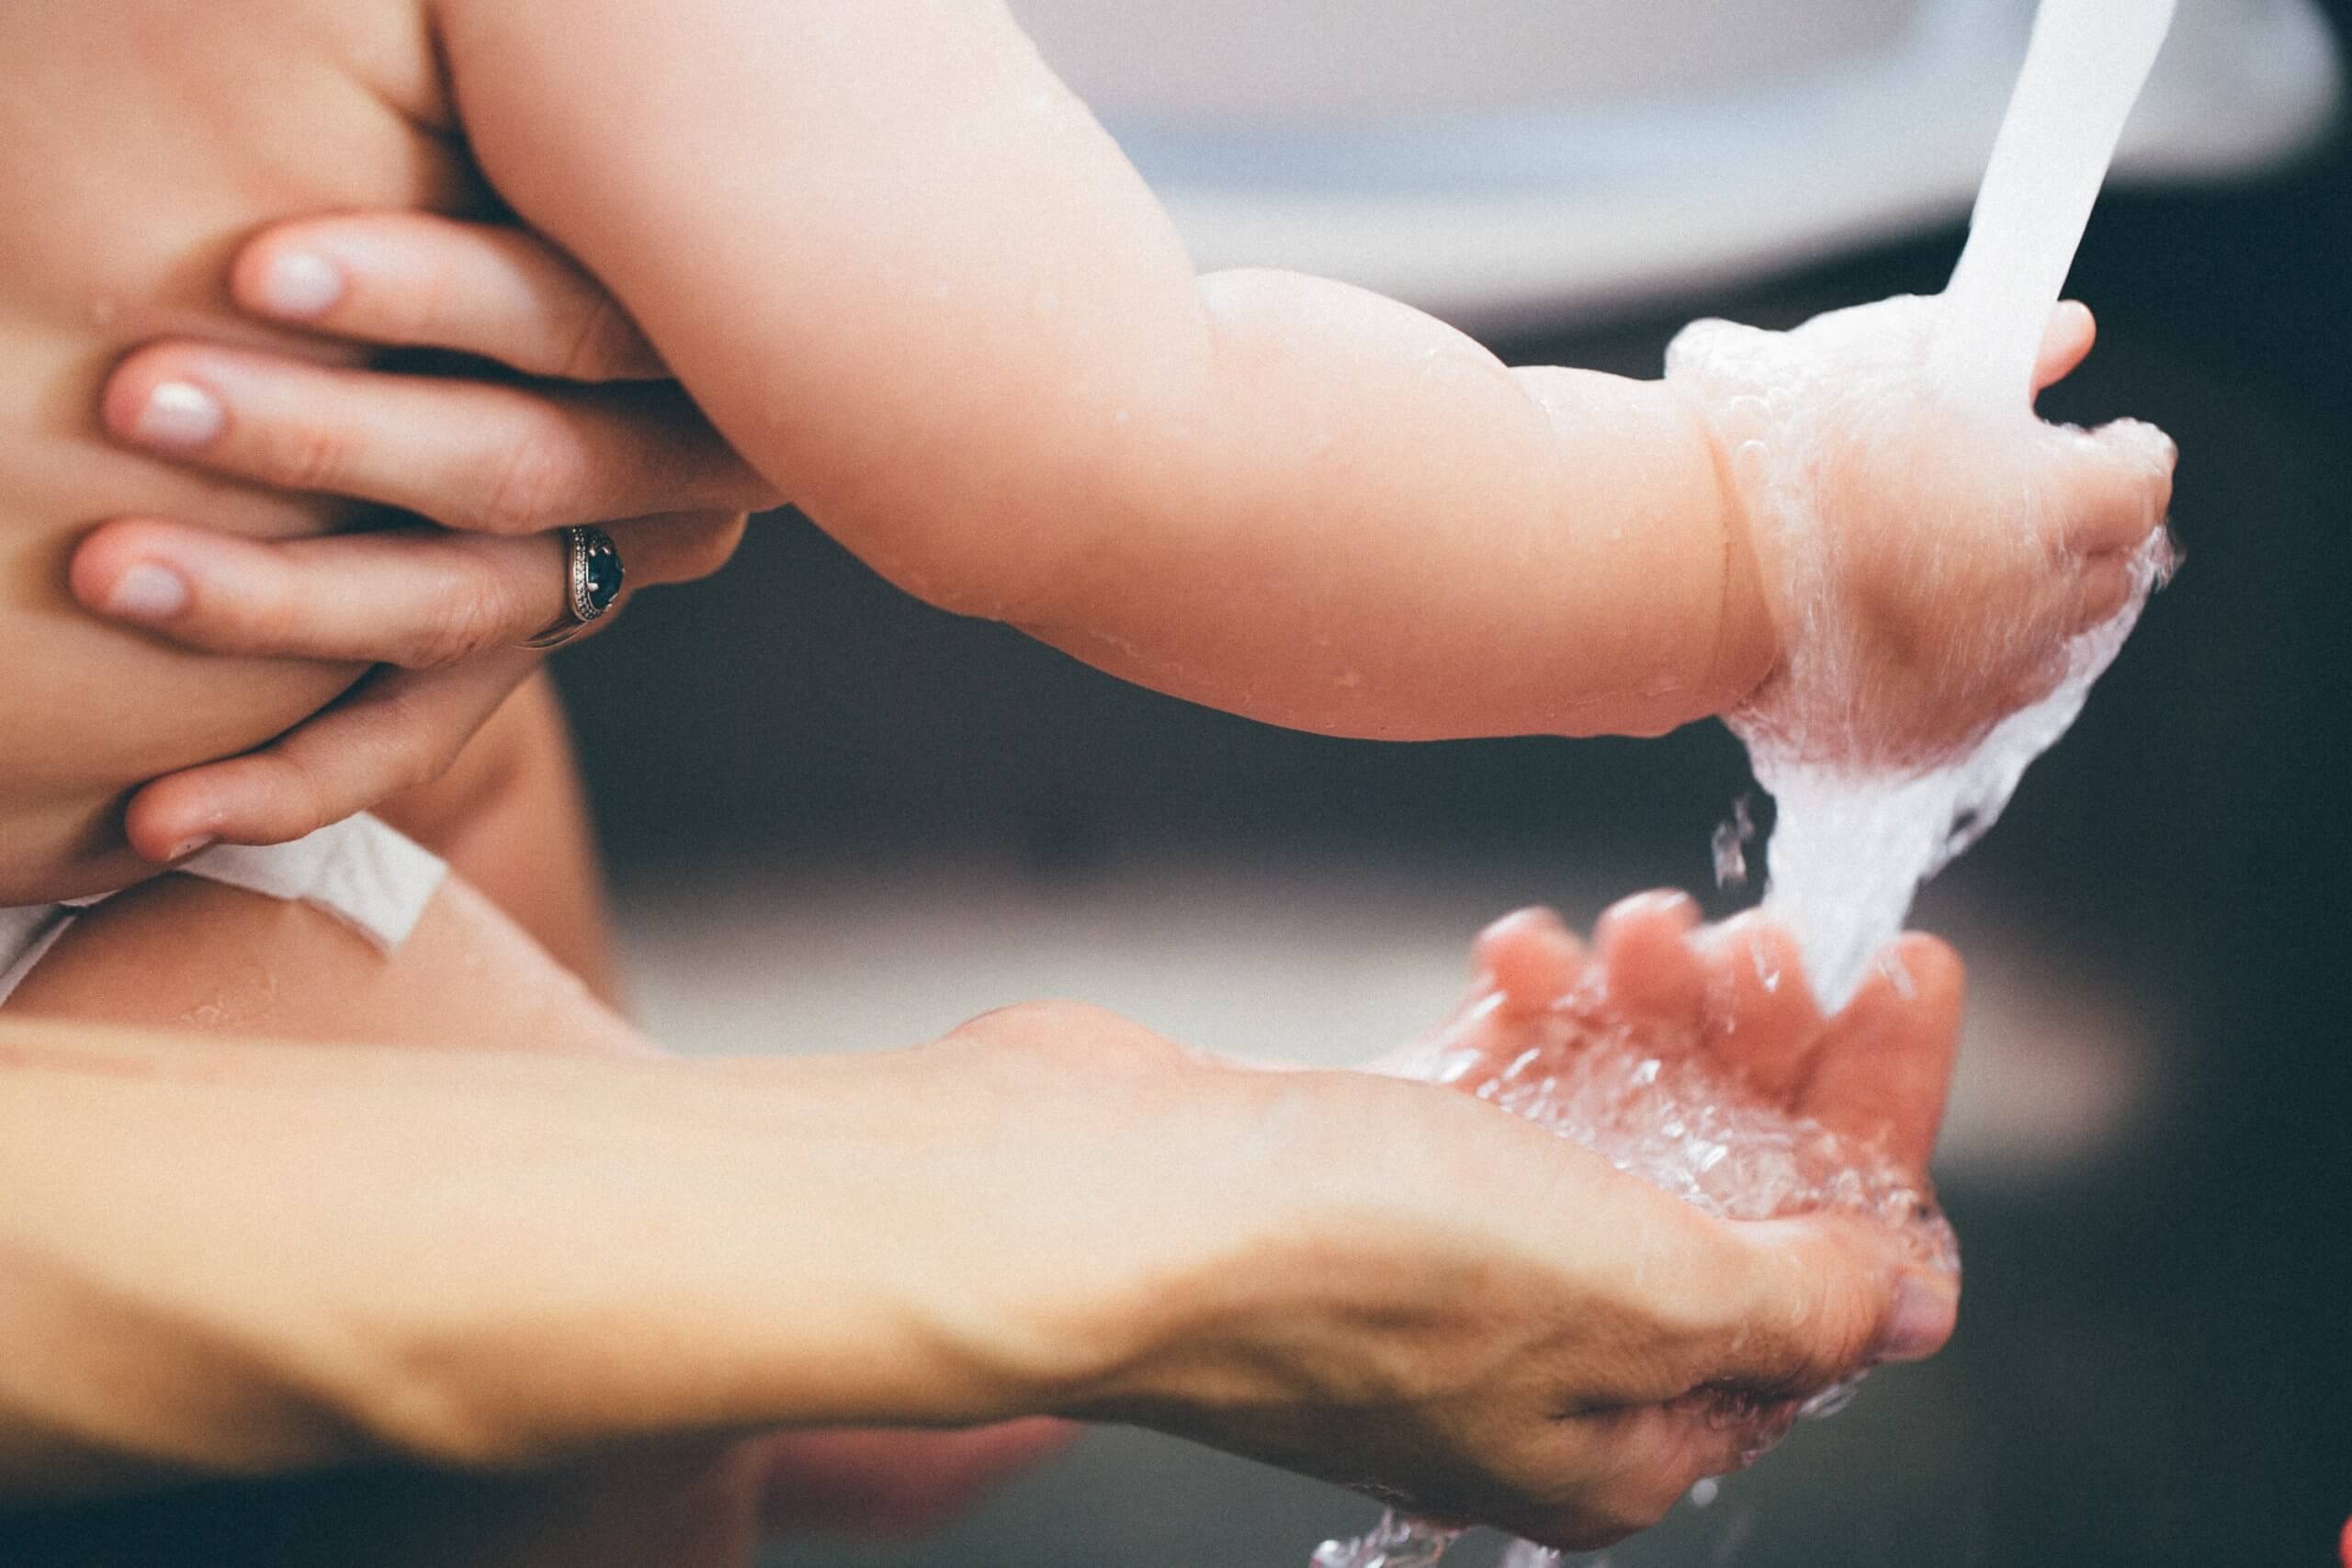 adult and child washing hands at sink